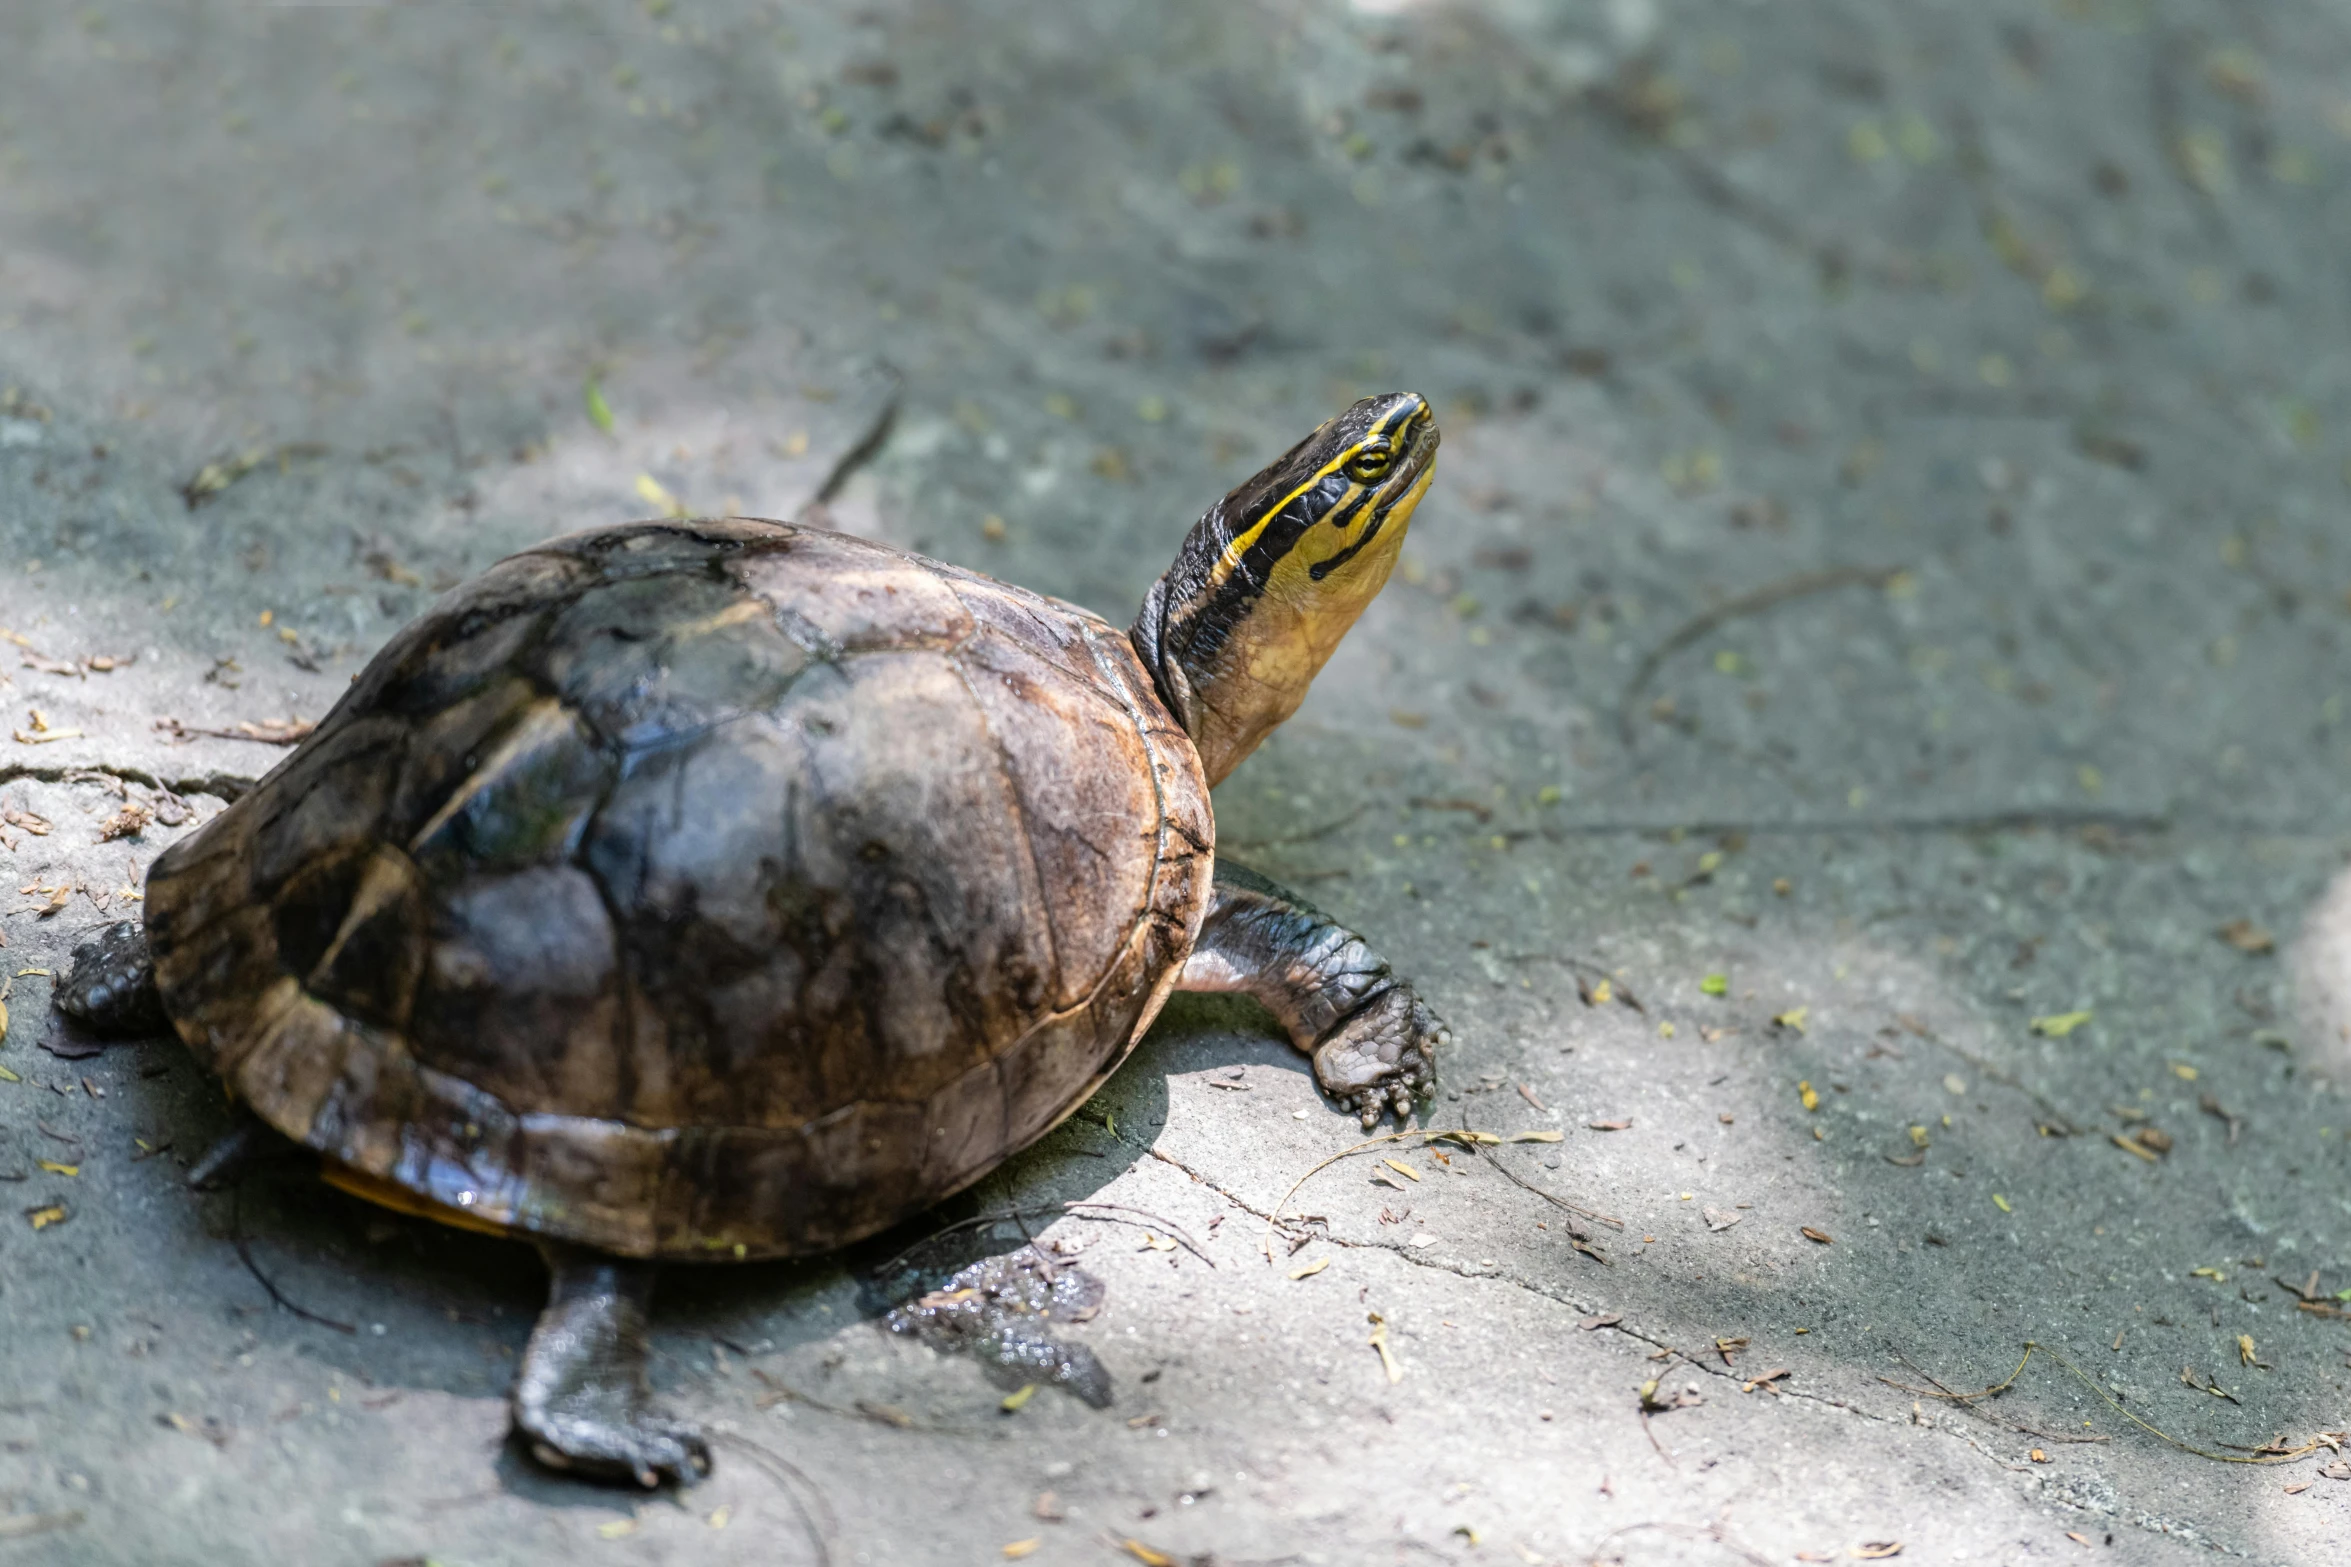 a turtle on concrete ground with one eye opened and his head turned